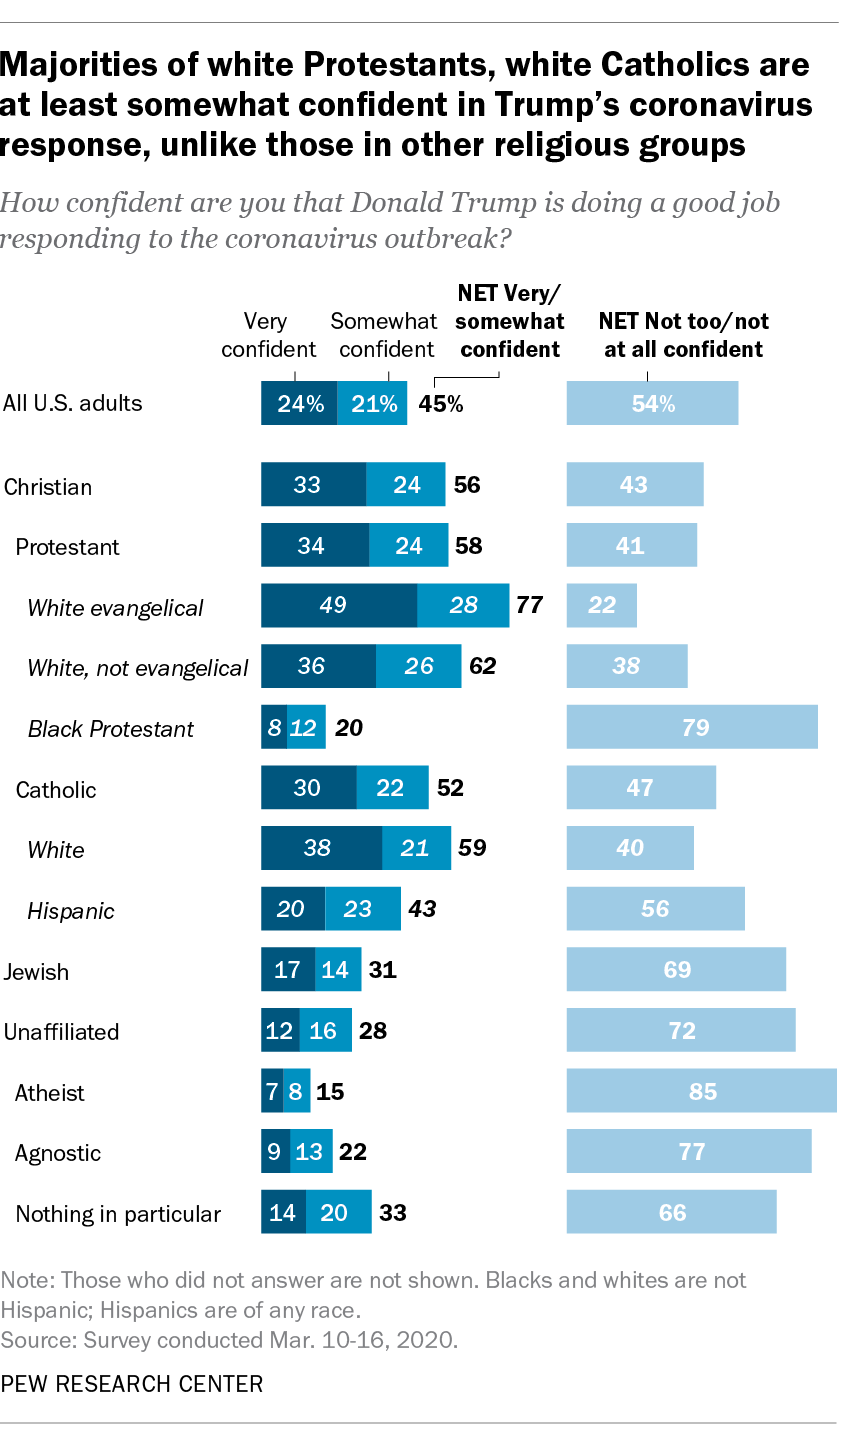 Majorities of white Protestants, white Catholics are at least somewhat confident in Trump's coronavirus response, unlike those in other religious groups